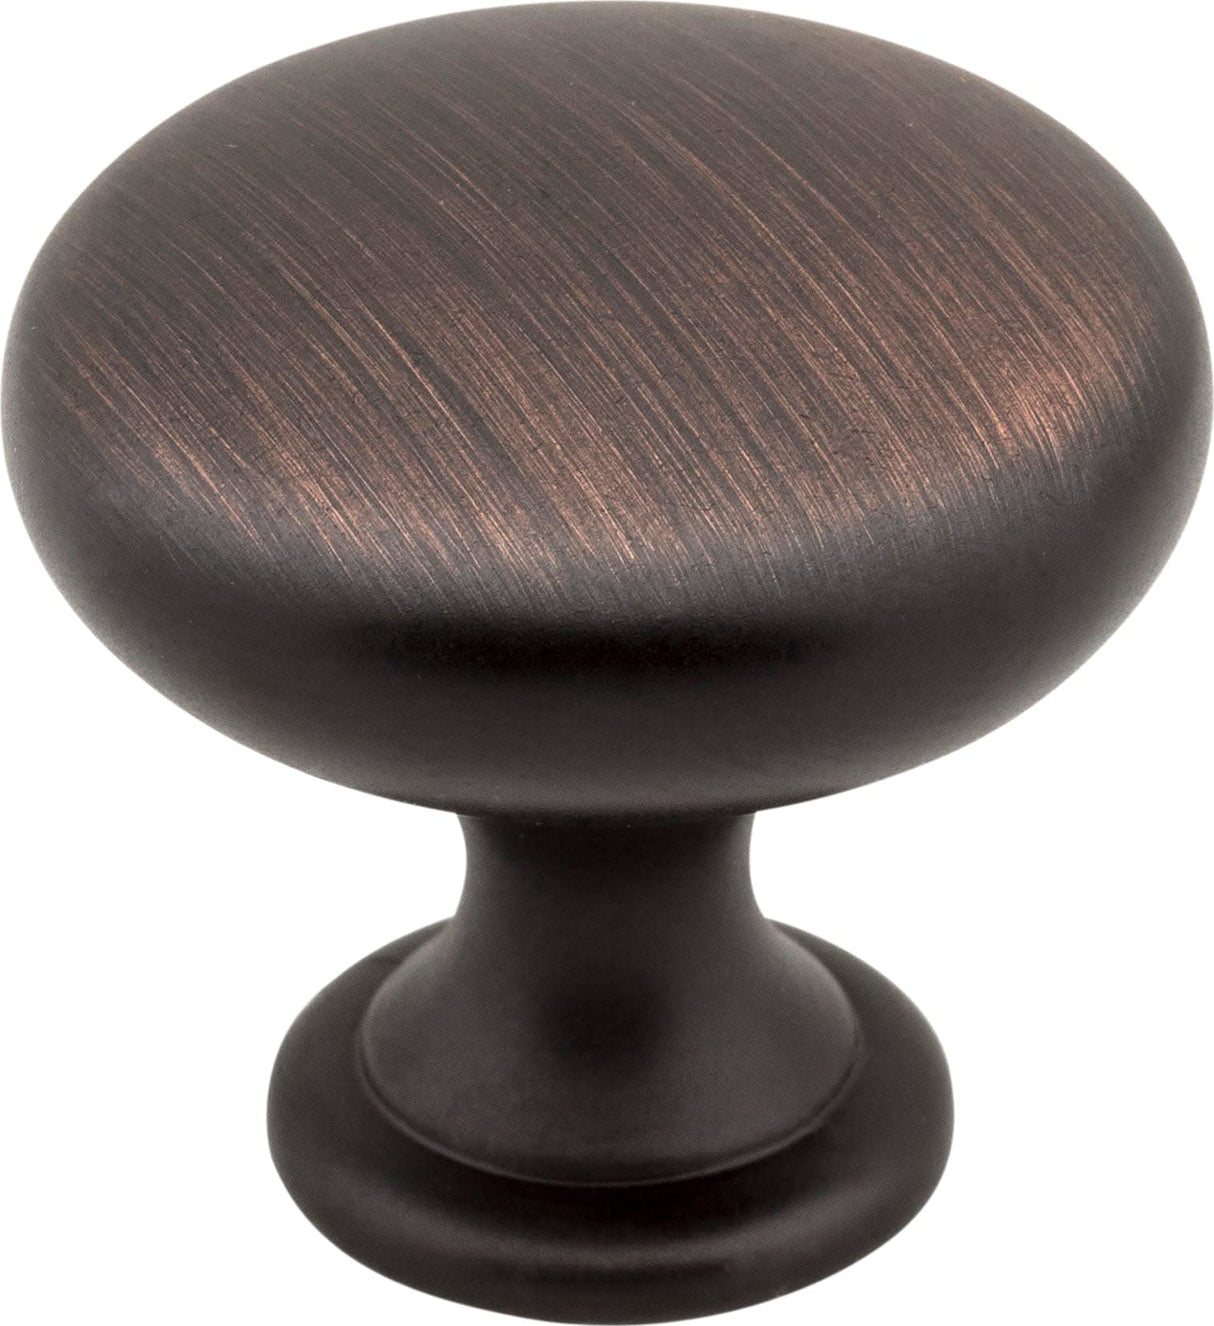 Elements 3910-DBAC-R 1-3/16" Diameter Brushed Oil Rubbed Bronze Madison Retail Packaged Cabinet Mushroom Knob